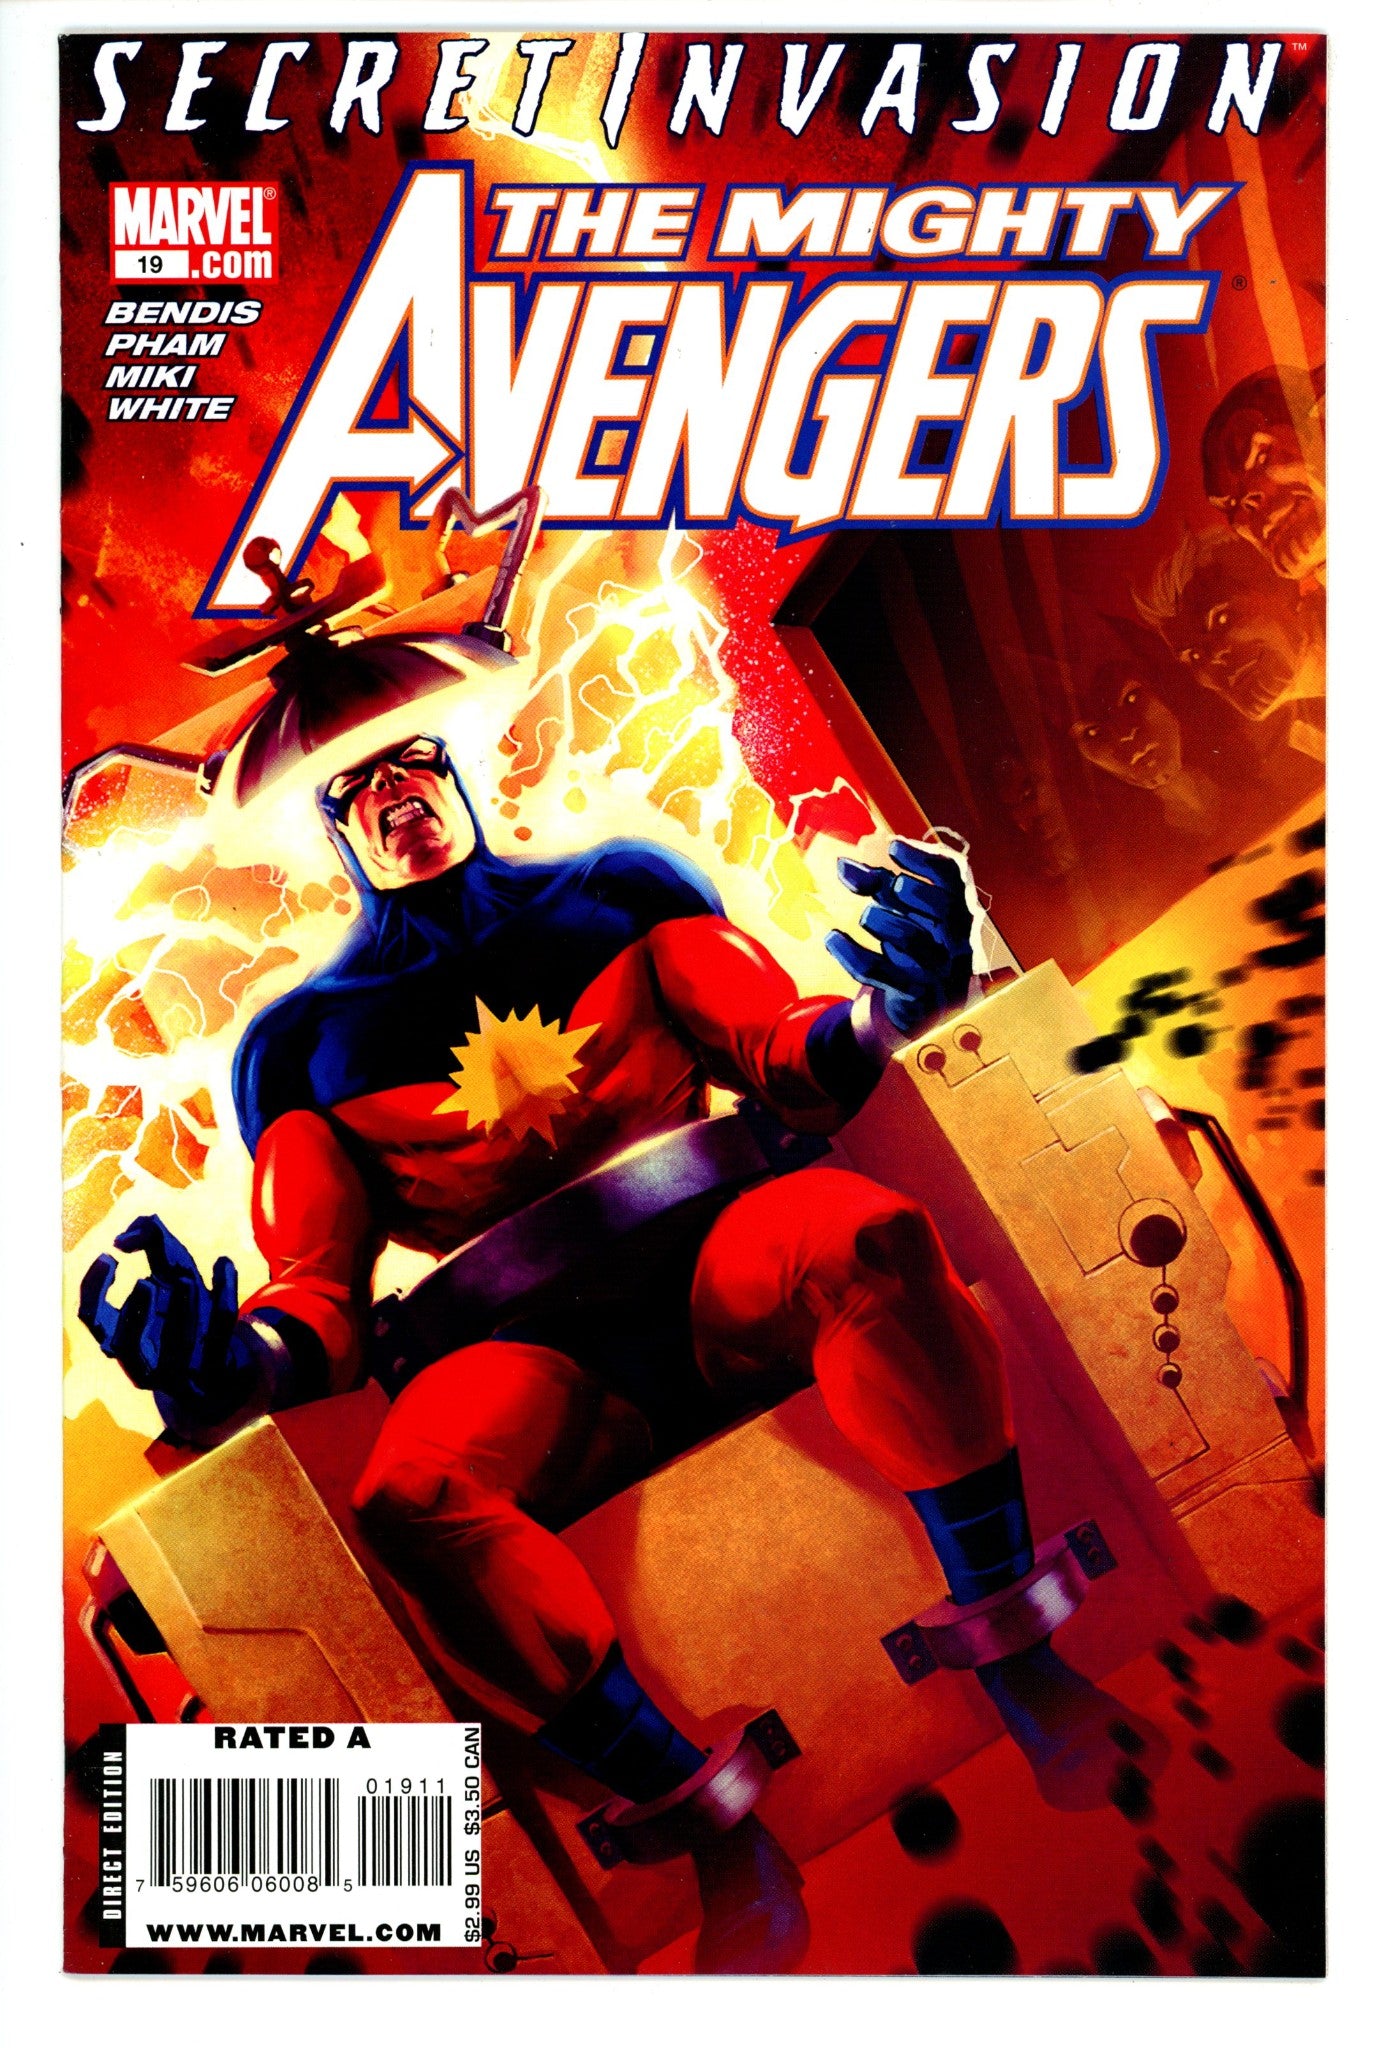 The Mighty Avengers Vol 1 19